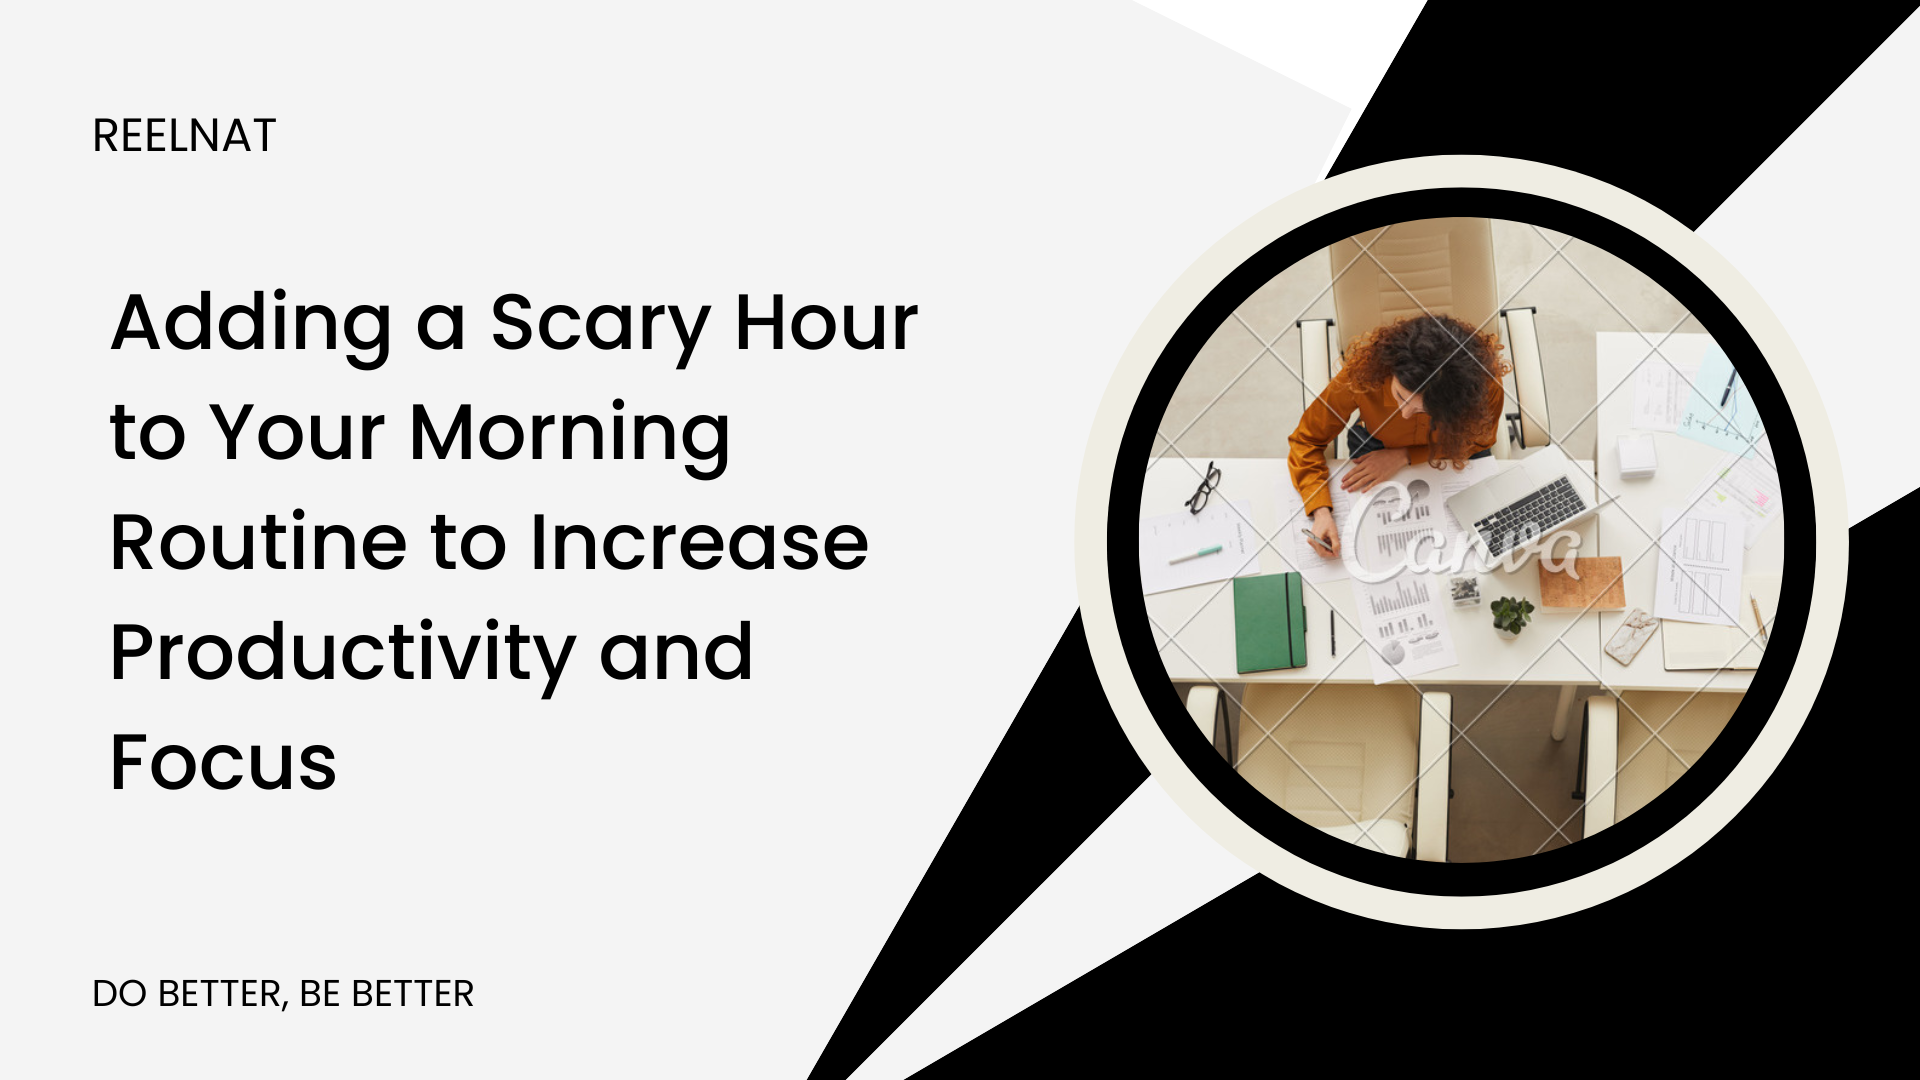 Adding a Scary Hour to Your Morning Routine to Increase Productivity and Focus